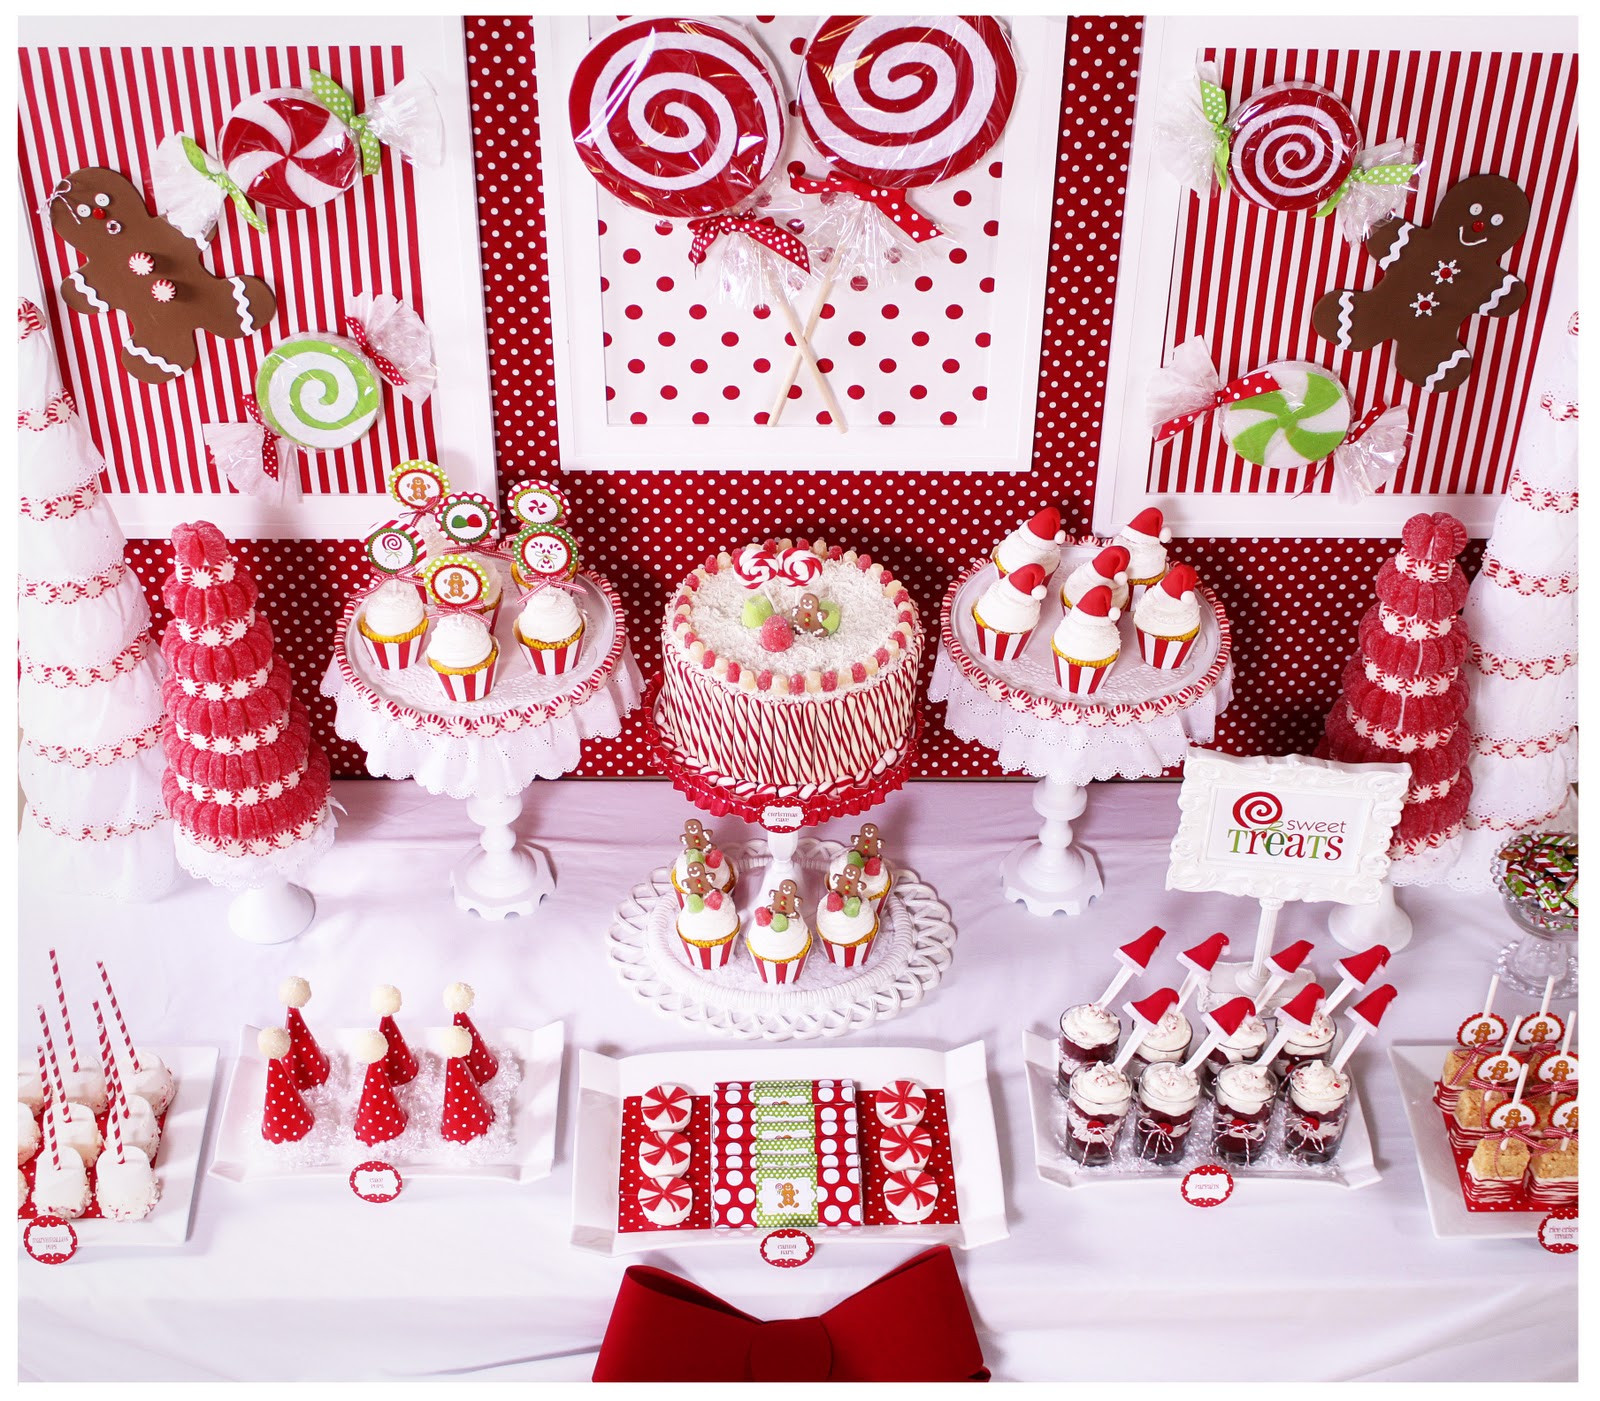 Cool Holiday Party Ideas
 Kara s Party Ideas Candy Land Christmas Party